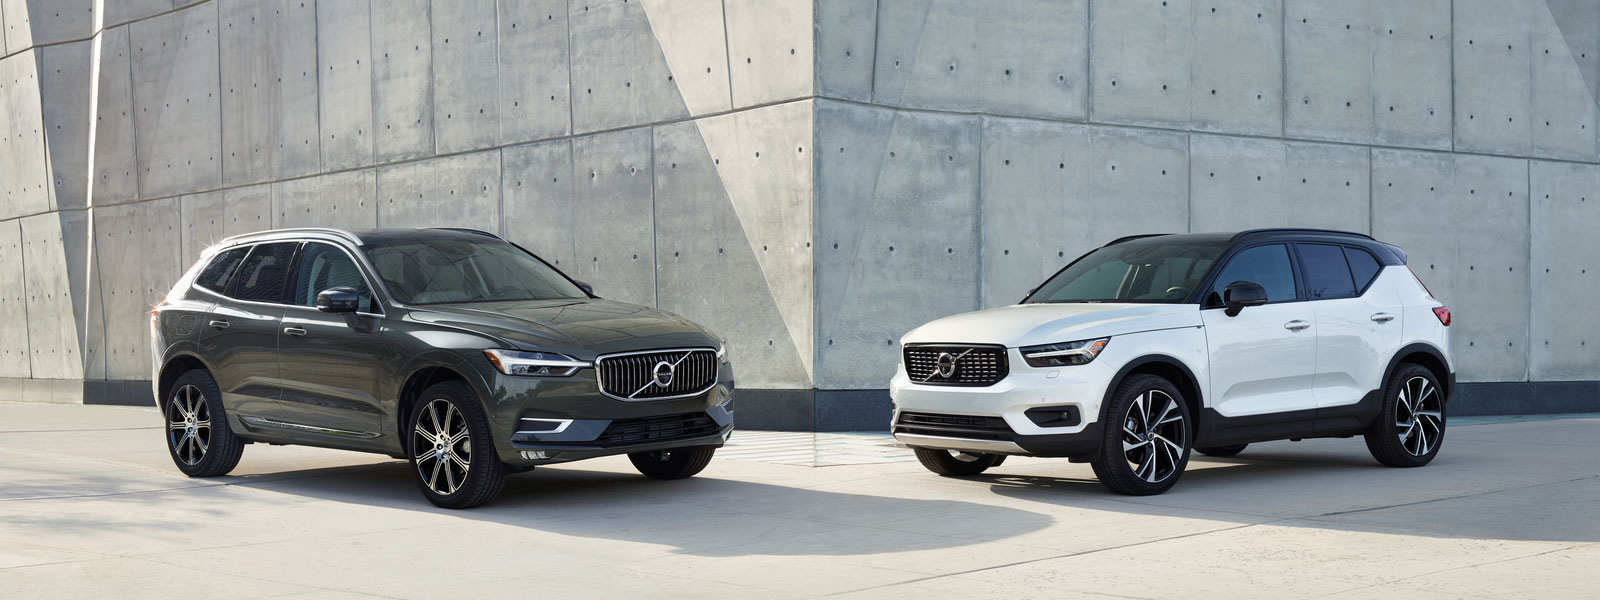 Volvo XC40 and XC60 Comparison Schumacher Volvo Cars of the Palm Beaches